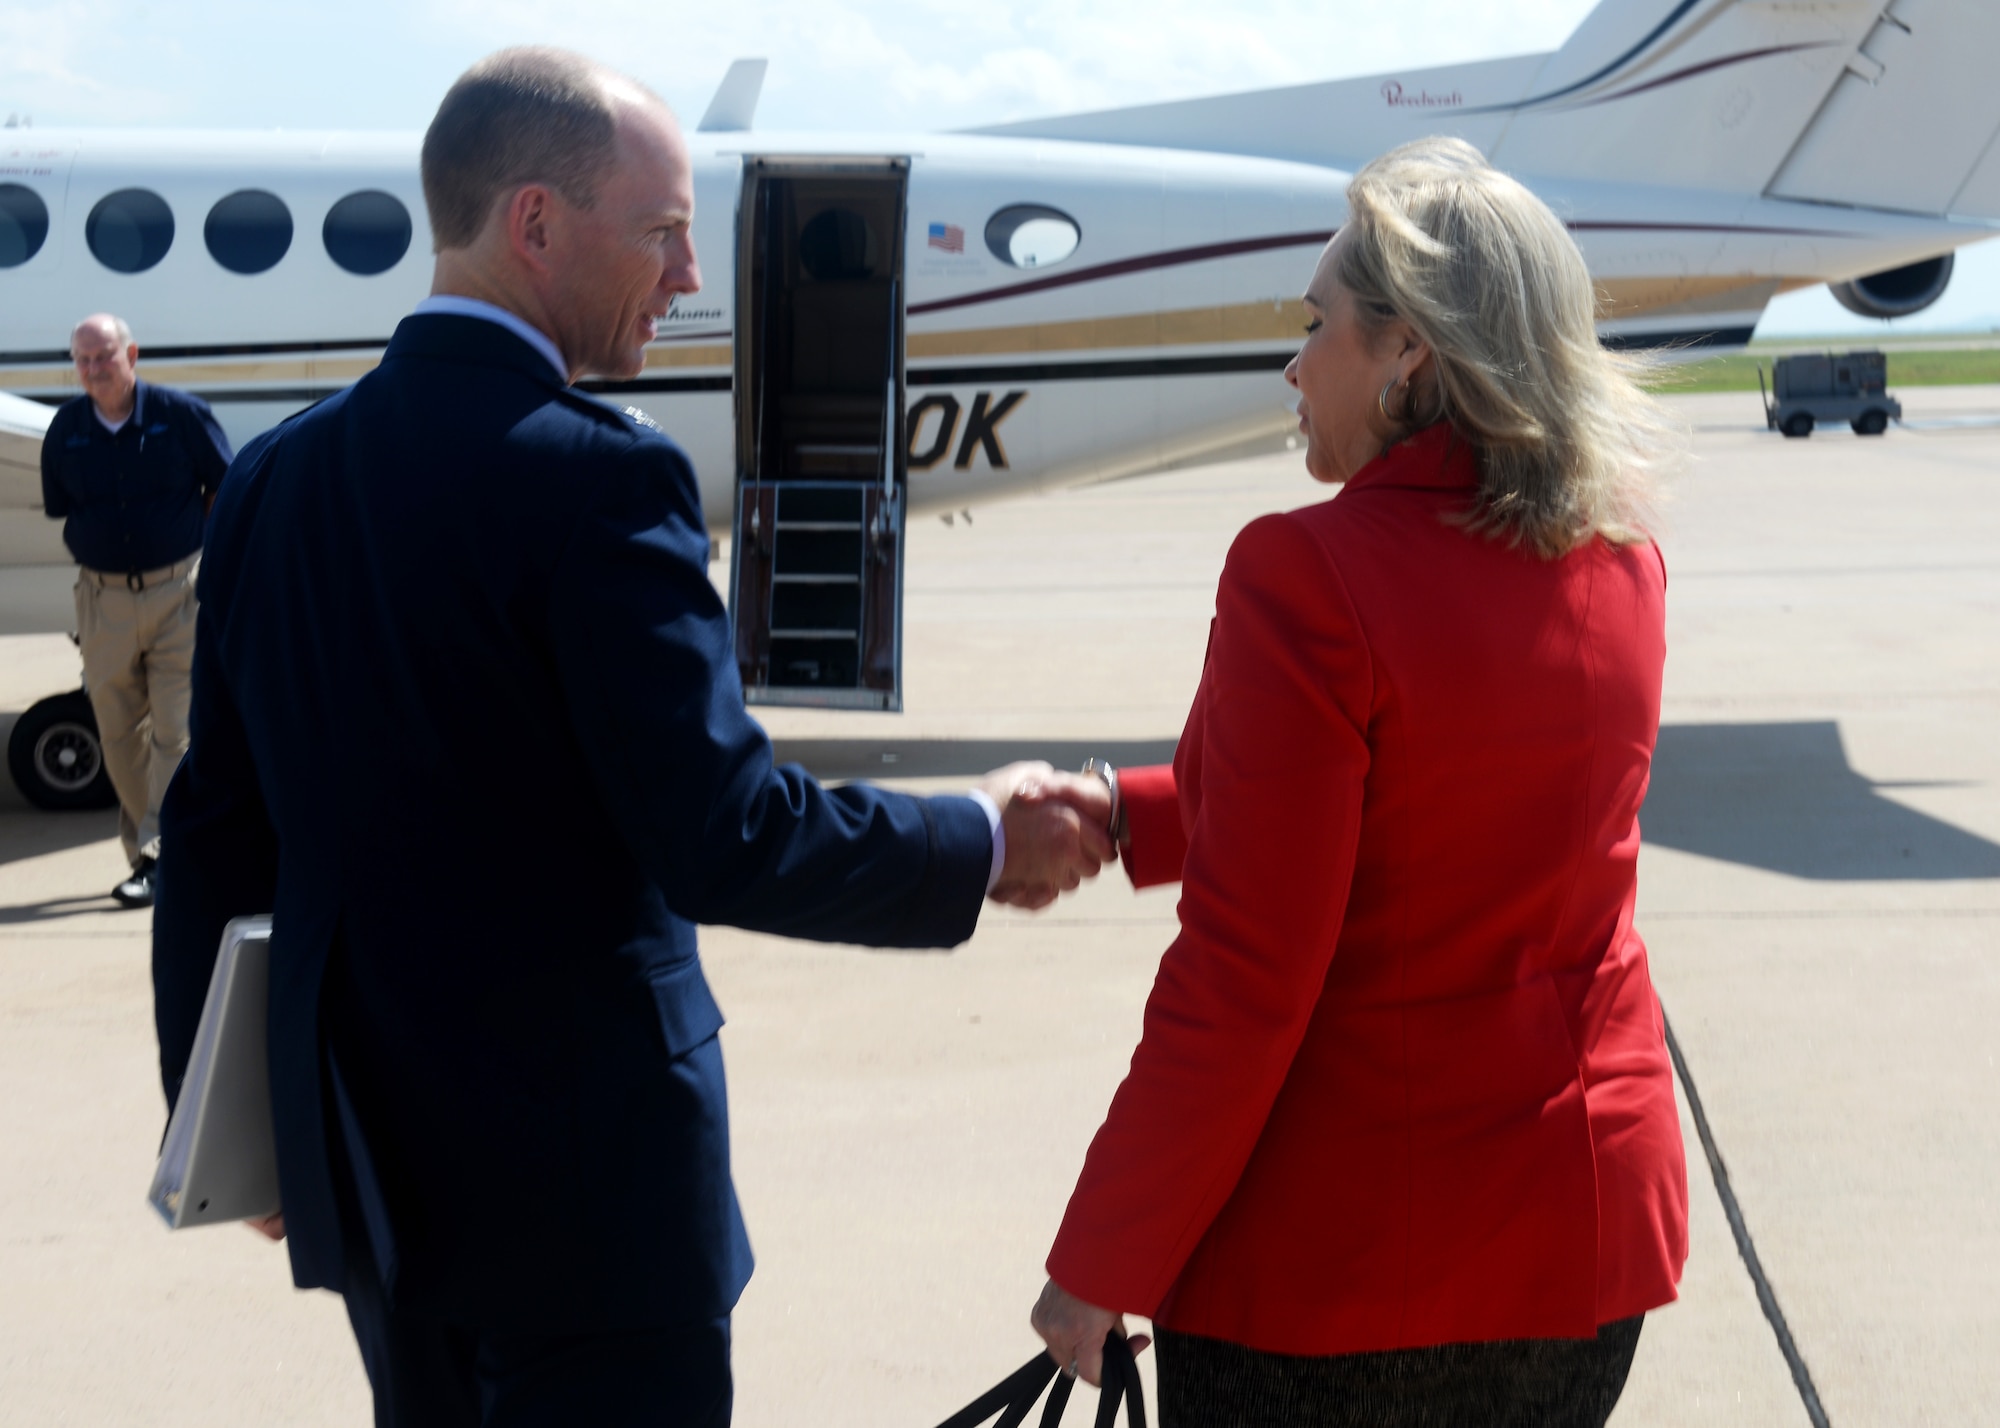 Oklahoma Governor Mary Fallin shakes hands with U.S. Air Force Col. Charles Ohliger, 97th Air Mobility Wing vice commander, as she prepares to leave after the “Forging the 46” event, Aug. 30, 2016, at Altus Air Force Base, Okla. The event consisted of an assumption of command for the reactivated 56th Air Refueling Squadron, dedication of the new KC-46 training facility, speeches from key Air Force and community leaders and concluded with a tour of the new facility for attendees.  (U.S. Air Force Photo by Airman Jackson N. Haddon/Released).